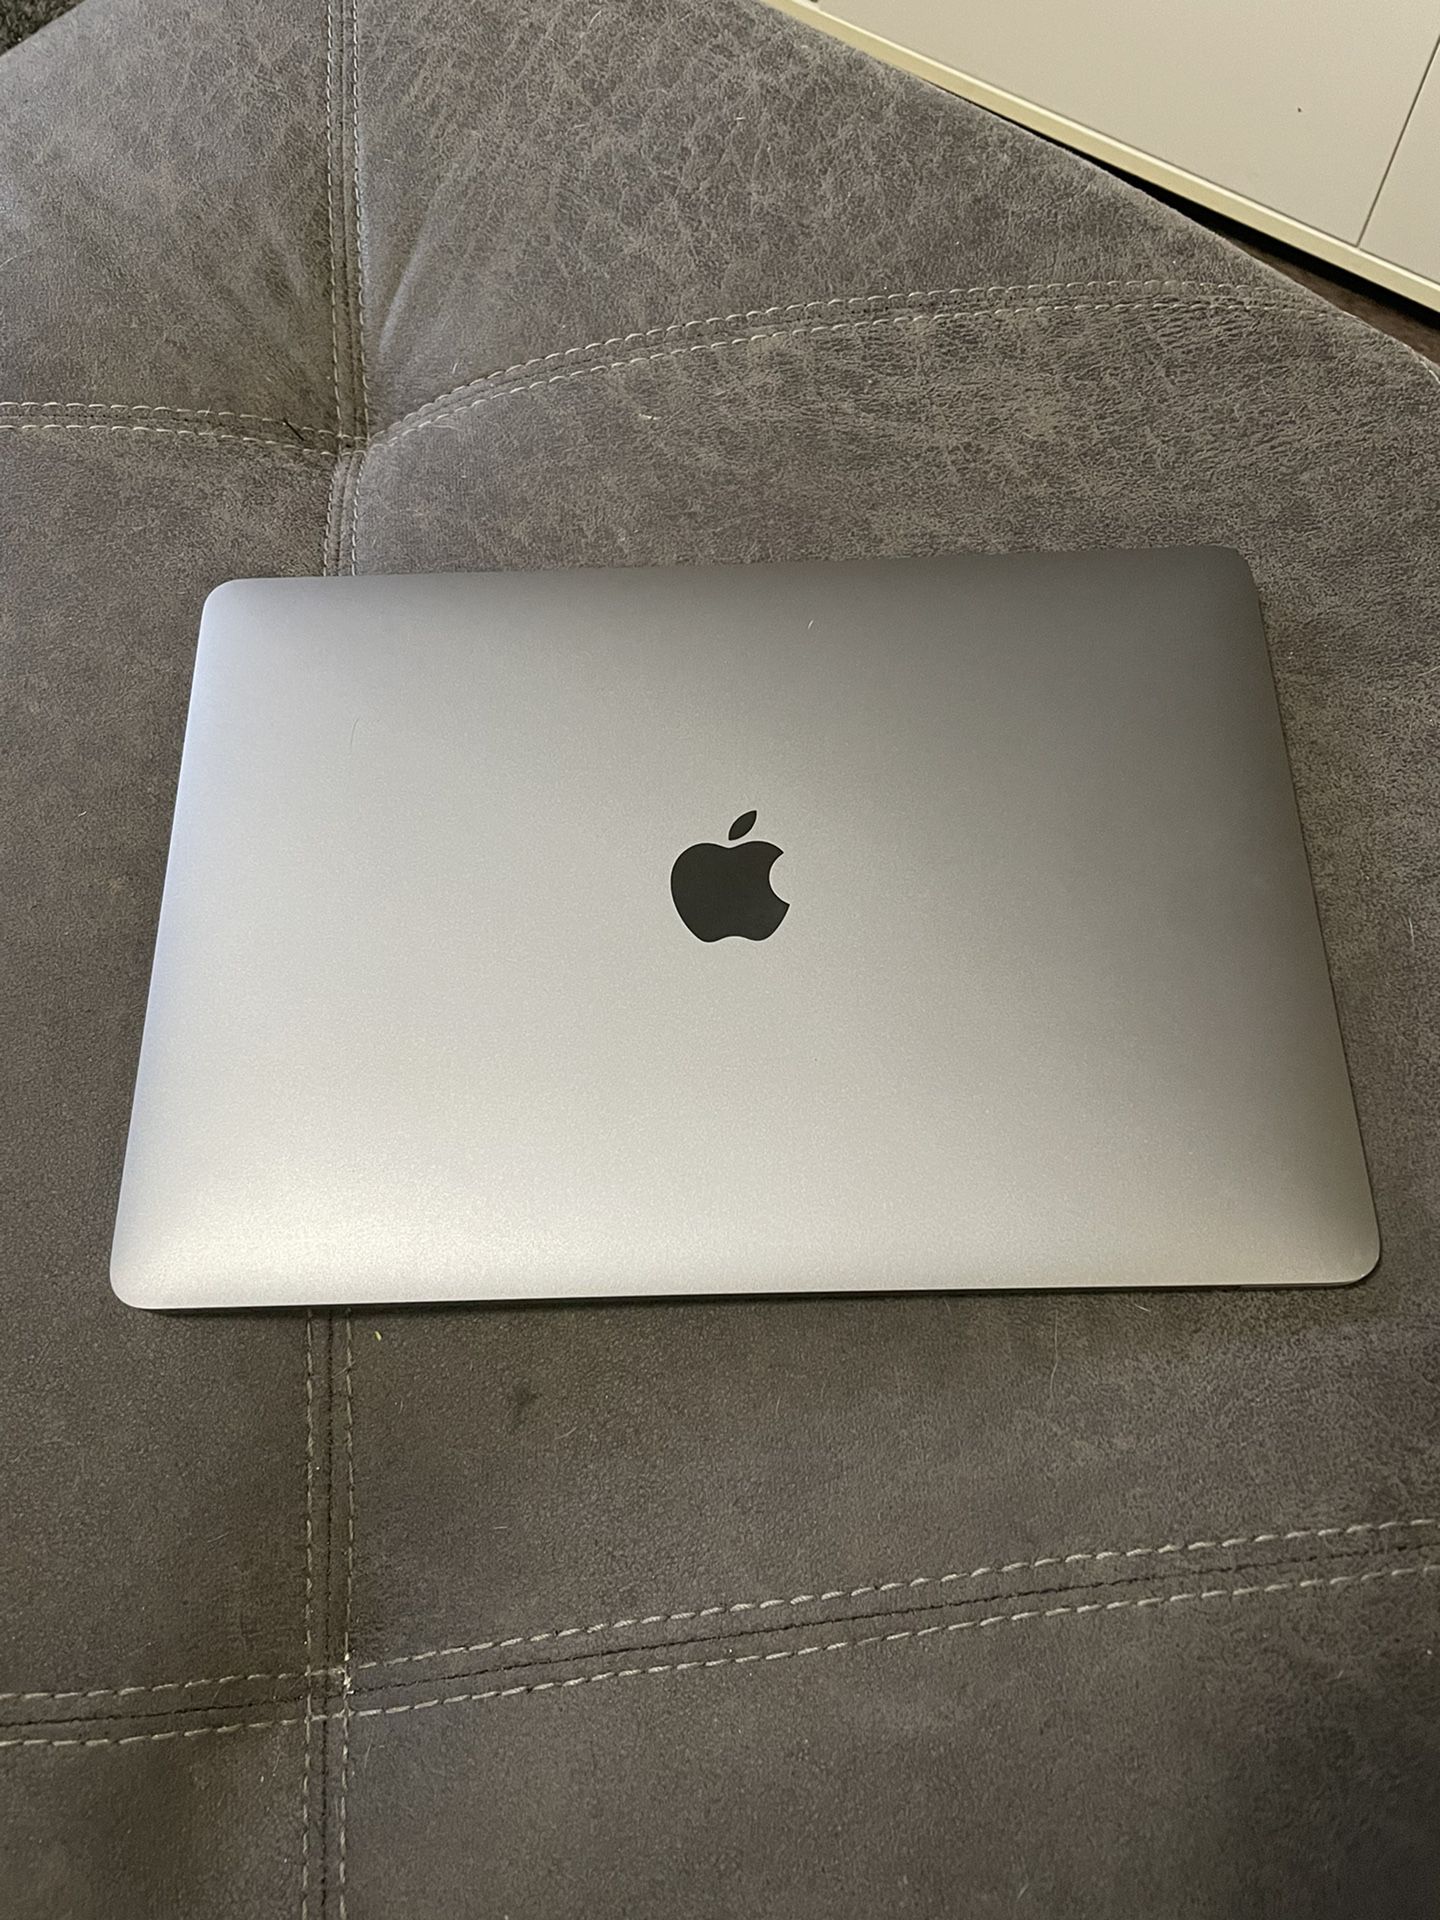 MacBook pro 13 2018 with Touch Bar. 256 gb SSD.